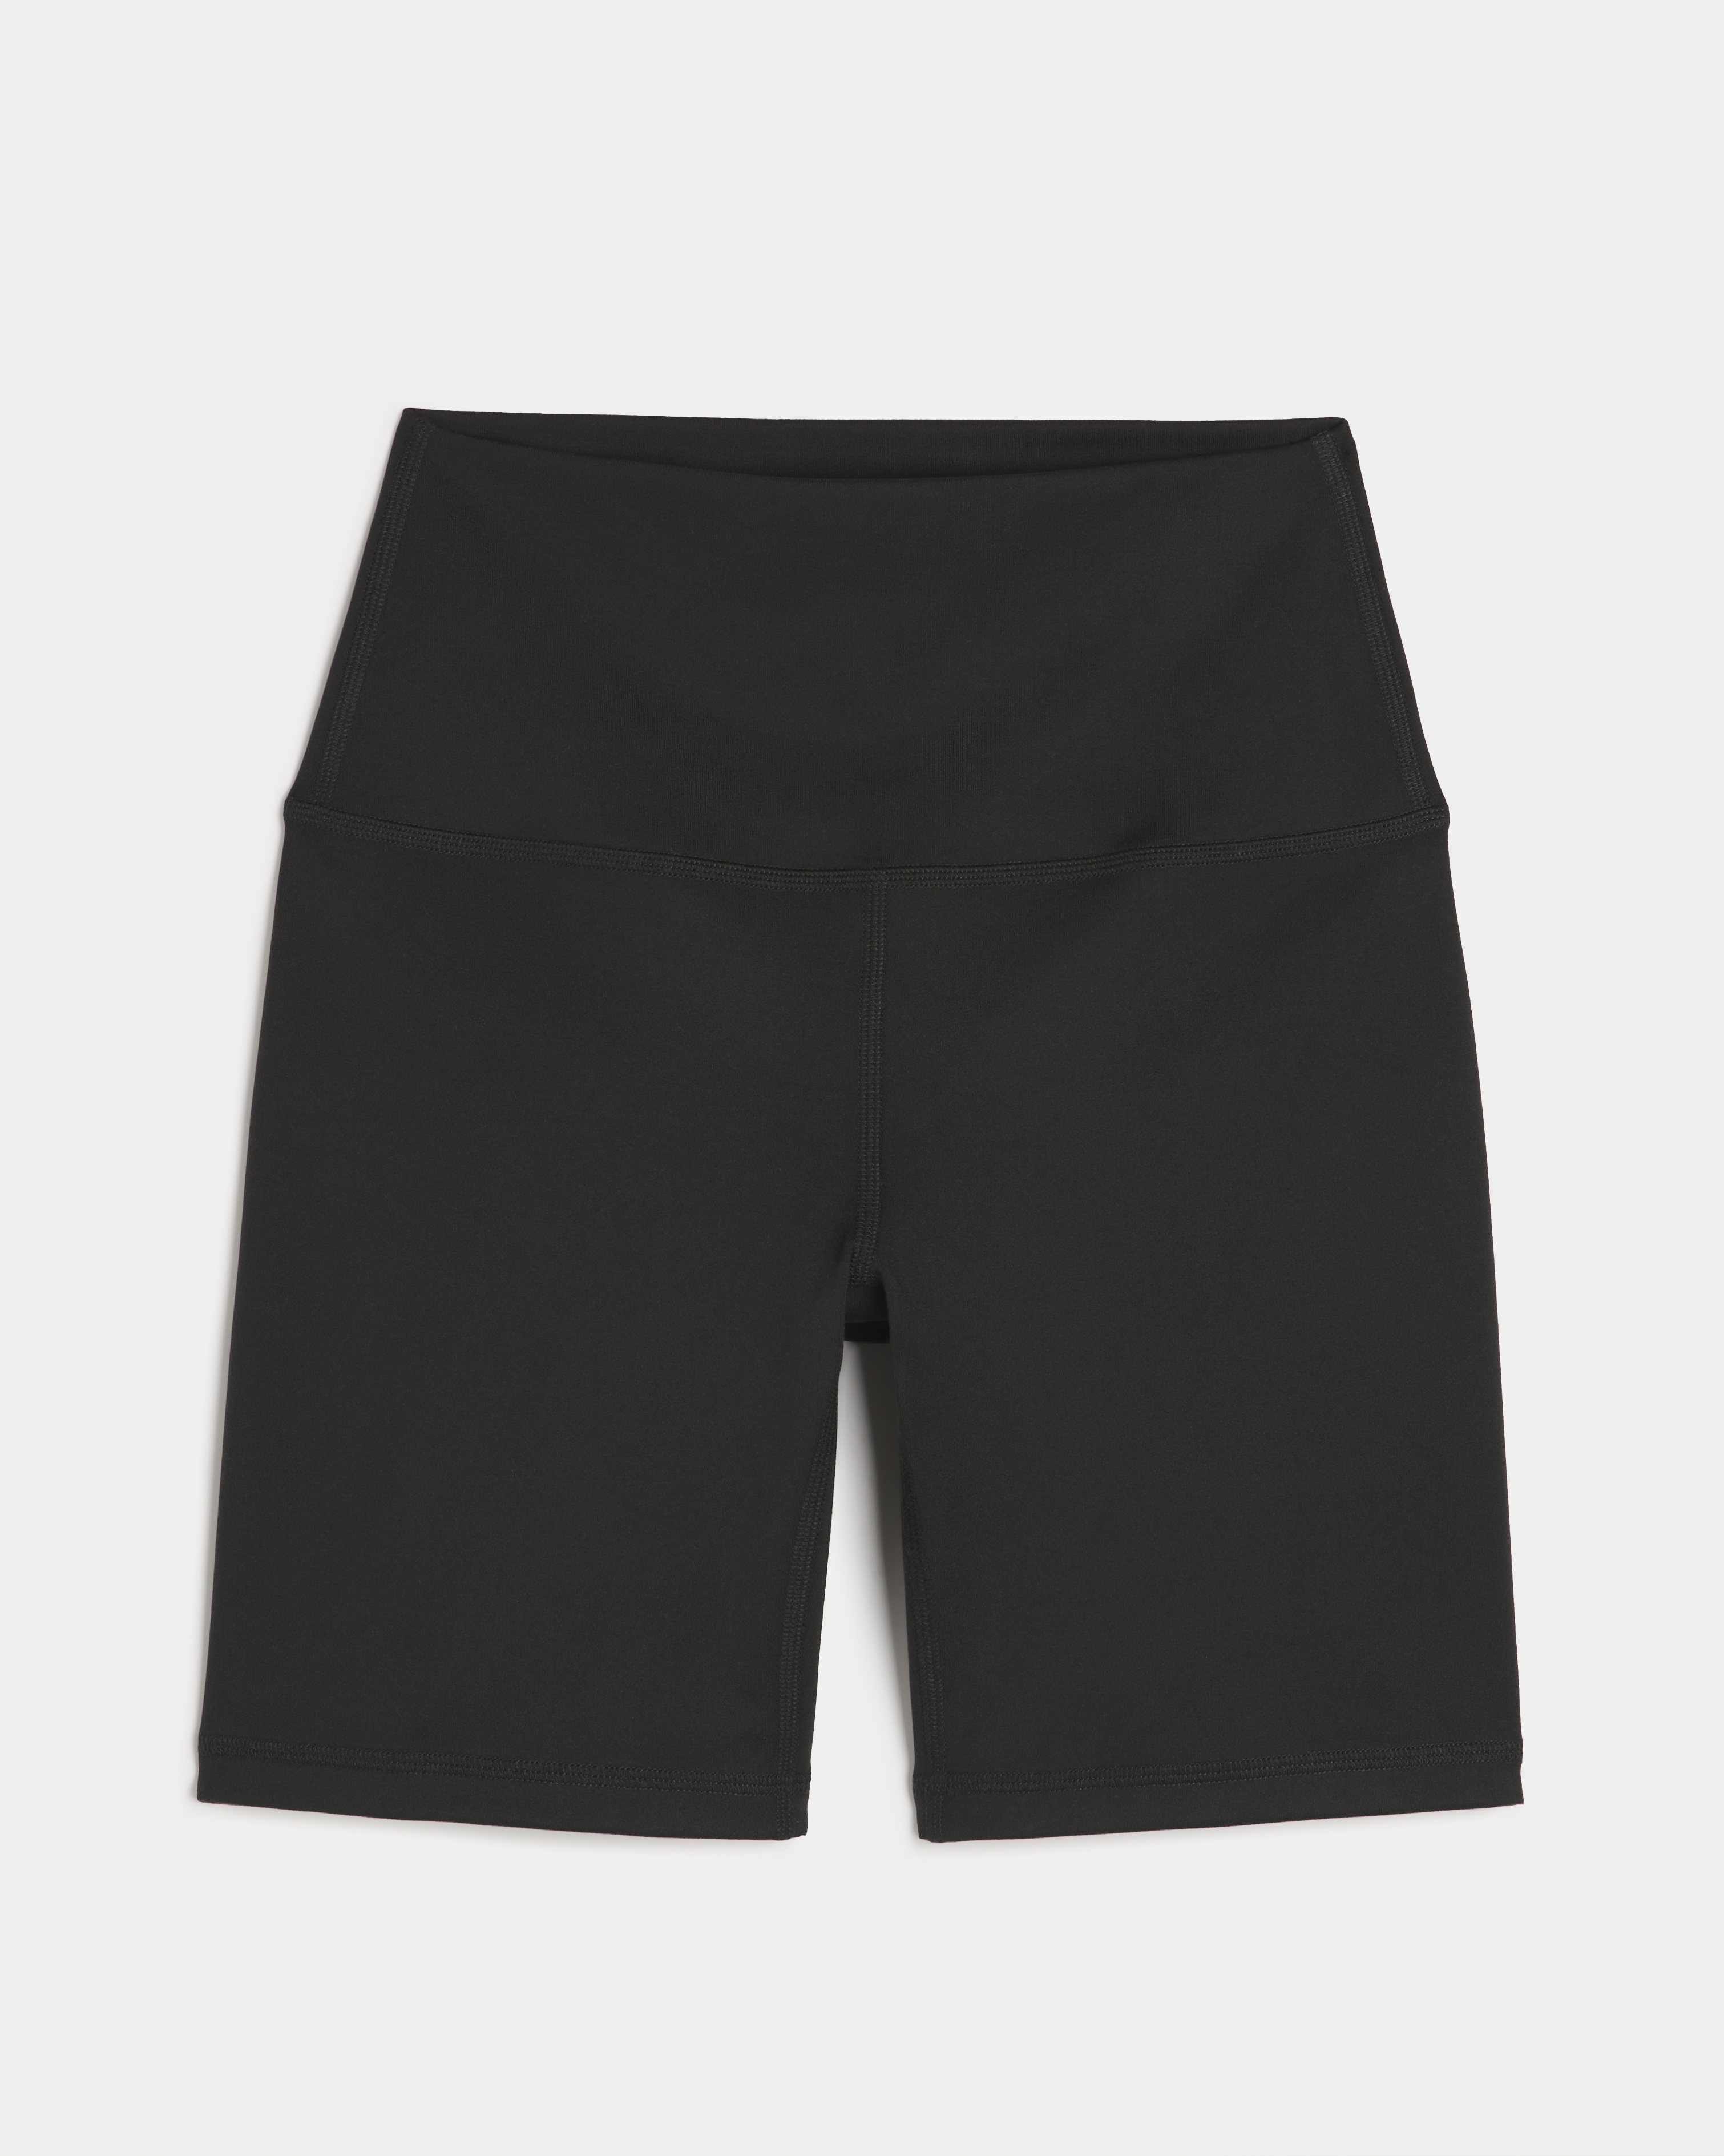 Gilly Hicks Active Recharge Bike Shorts 7"